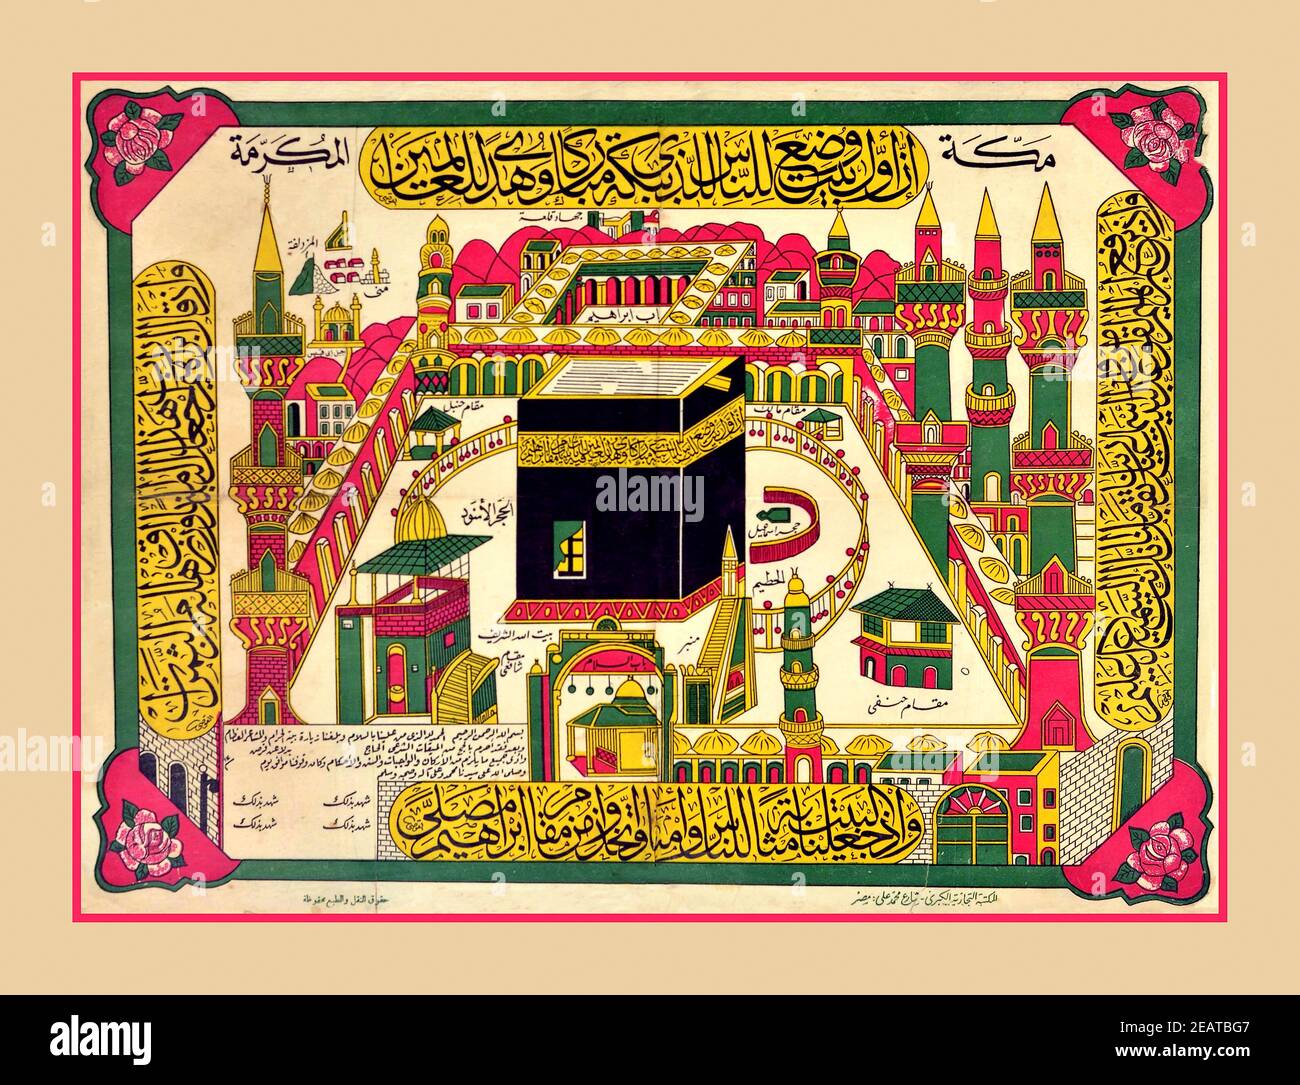 MECCA 1900’s Travel Poster Kaaba Hajj Mecca Pilgrimage. vintage  poster with a view of Kaab in Mecca. Detailed illustration of the Masjid al-Haram mosque in Mecca, Saudi Arabia with Arabic text. The poster was obtained by one of the pilgrims on his visit to Mecca. The Kaaba, is a building at the center of Islam's most important mosque, the Masjid al-Haram in Mecca, Saudi Arabia. It is the most sacred site in Islam. It is considered by Muslims to be the Bayt Allah - The House of God and is the qibla (direction of prayer) for Muslims around the world when performing salah. Saudi Arabia, 1900s Stock Photo